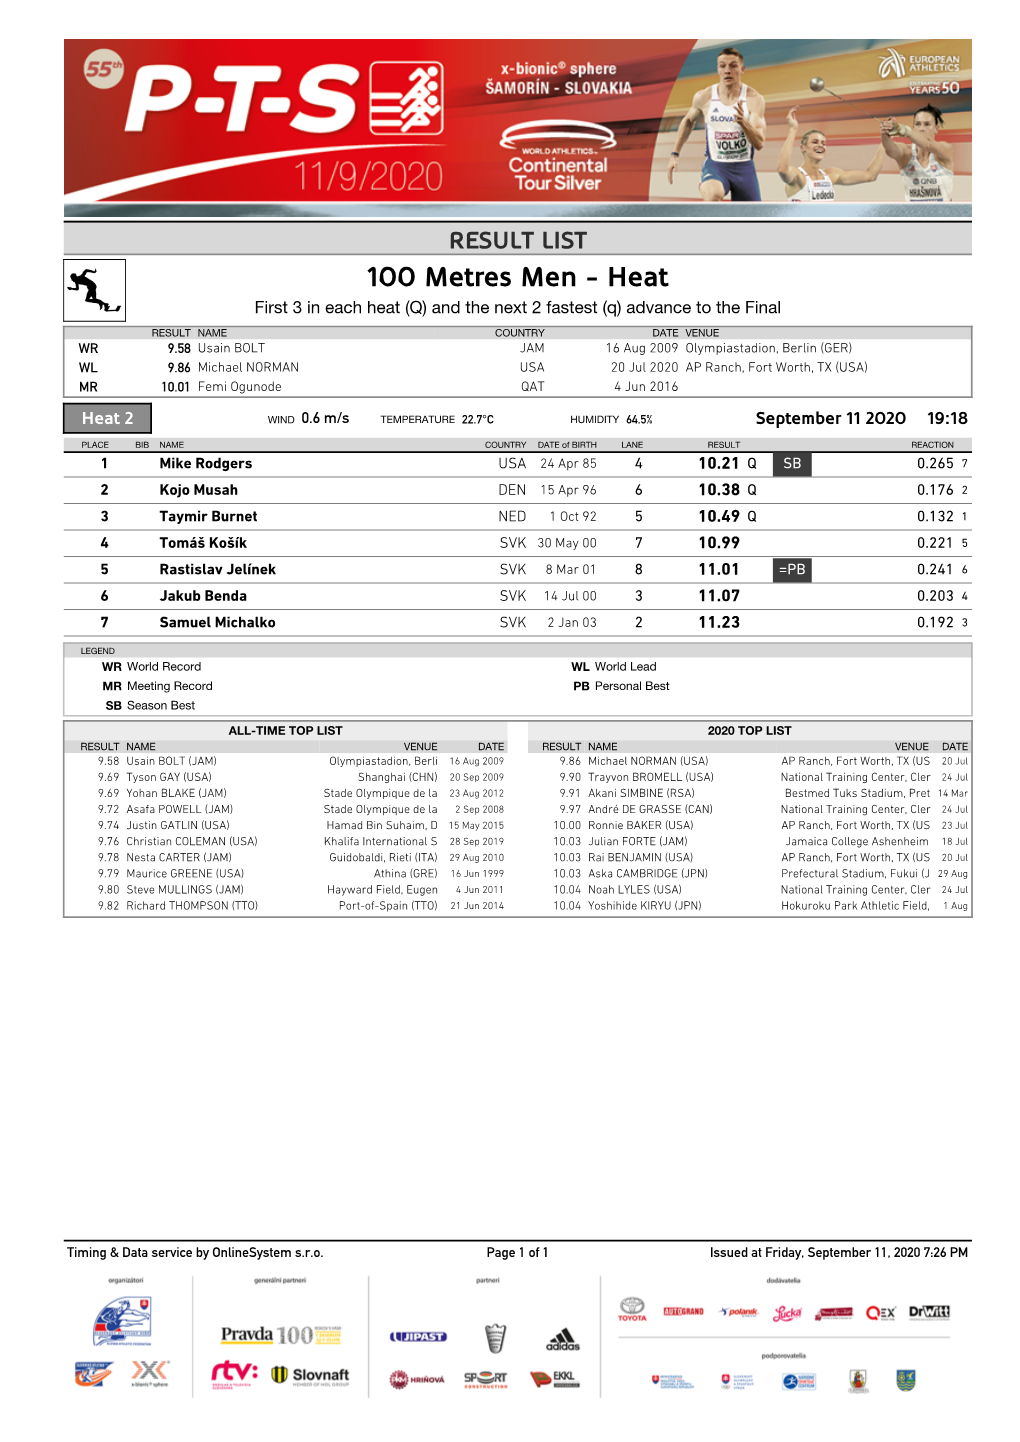 100 Metres Men - Heat First 3 in Each Heat (Q) and the Next 2 Fastest (Q) Advance to the Final